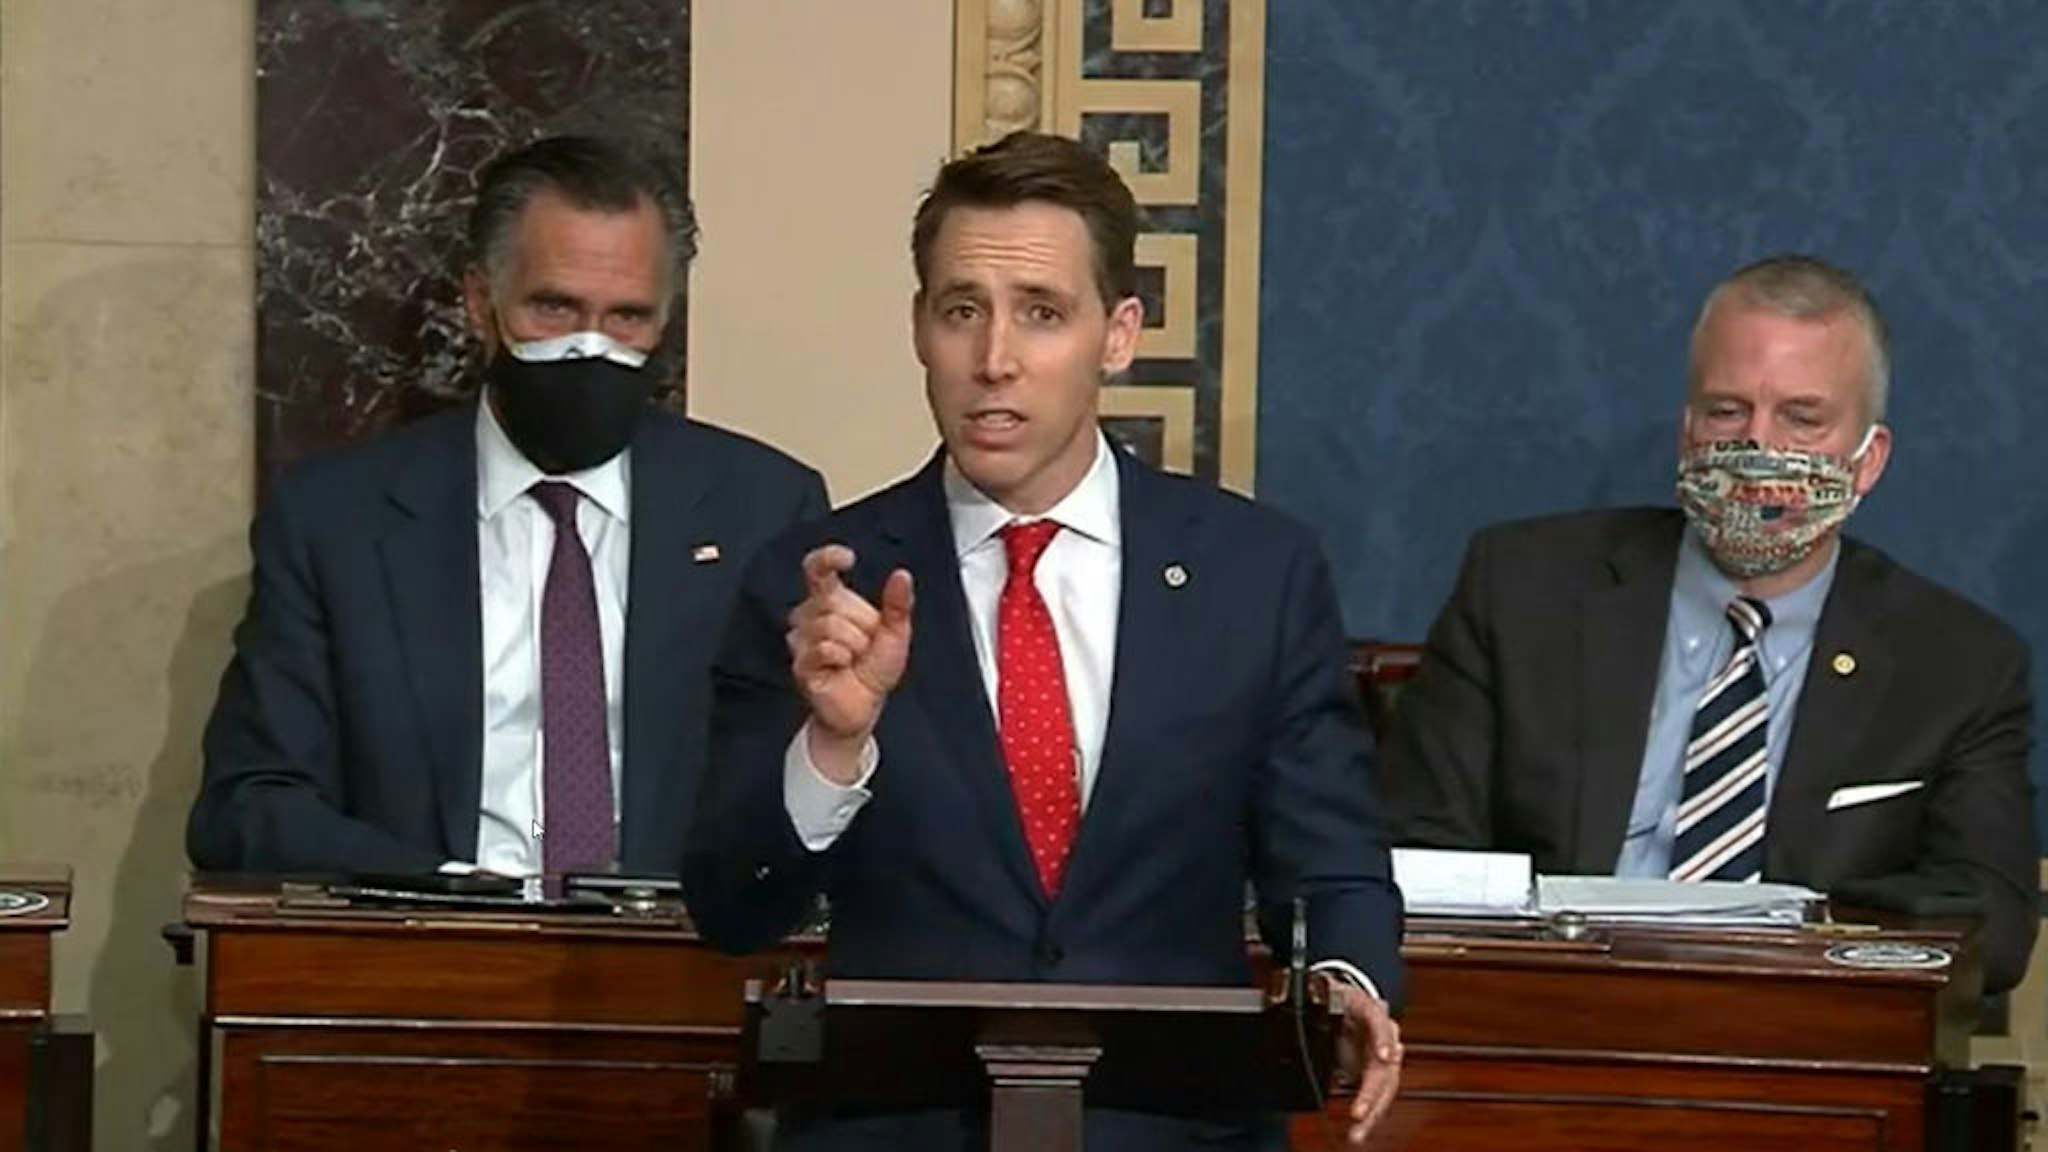 WASHINGTON, DC - JANUARY 6: In this screenshot taken from a congress.gov webcast, Sen. Josh Hawley (R-MO) speaks during a Senate debate session to ratify the 2020 presidential election at the U.S. Capitol on January 6, 2021 in Washington, DC.